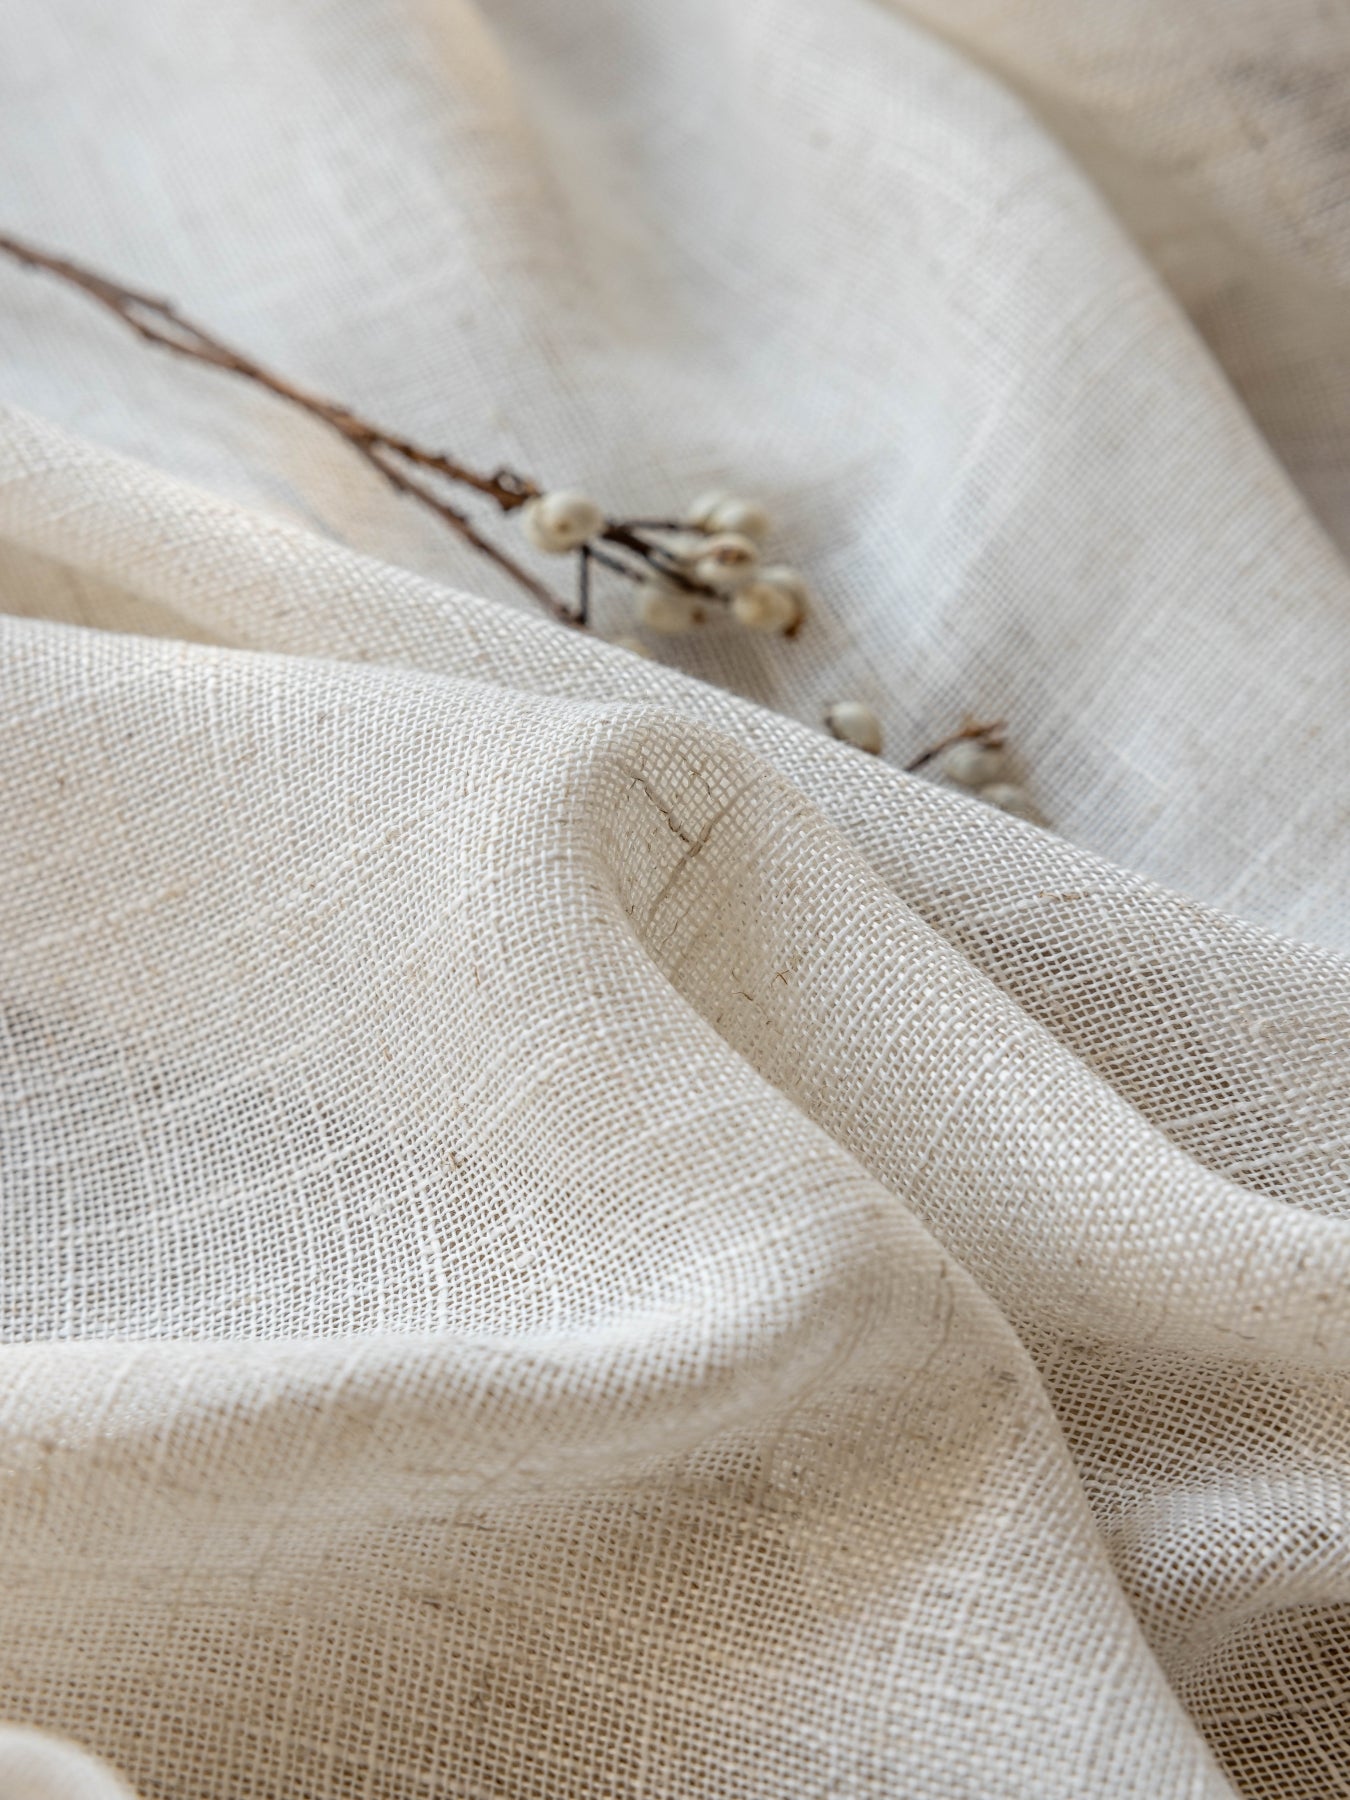 Close-up of luxurious linen drape with natural textured weave and dried botanical twigs accentuating its eco-friendly material